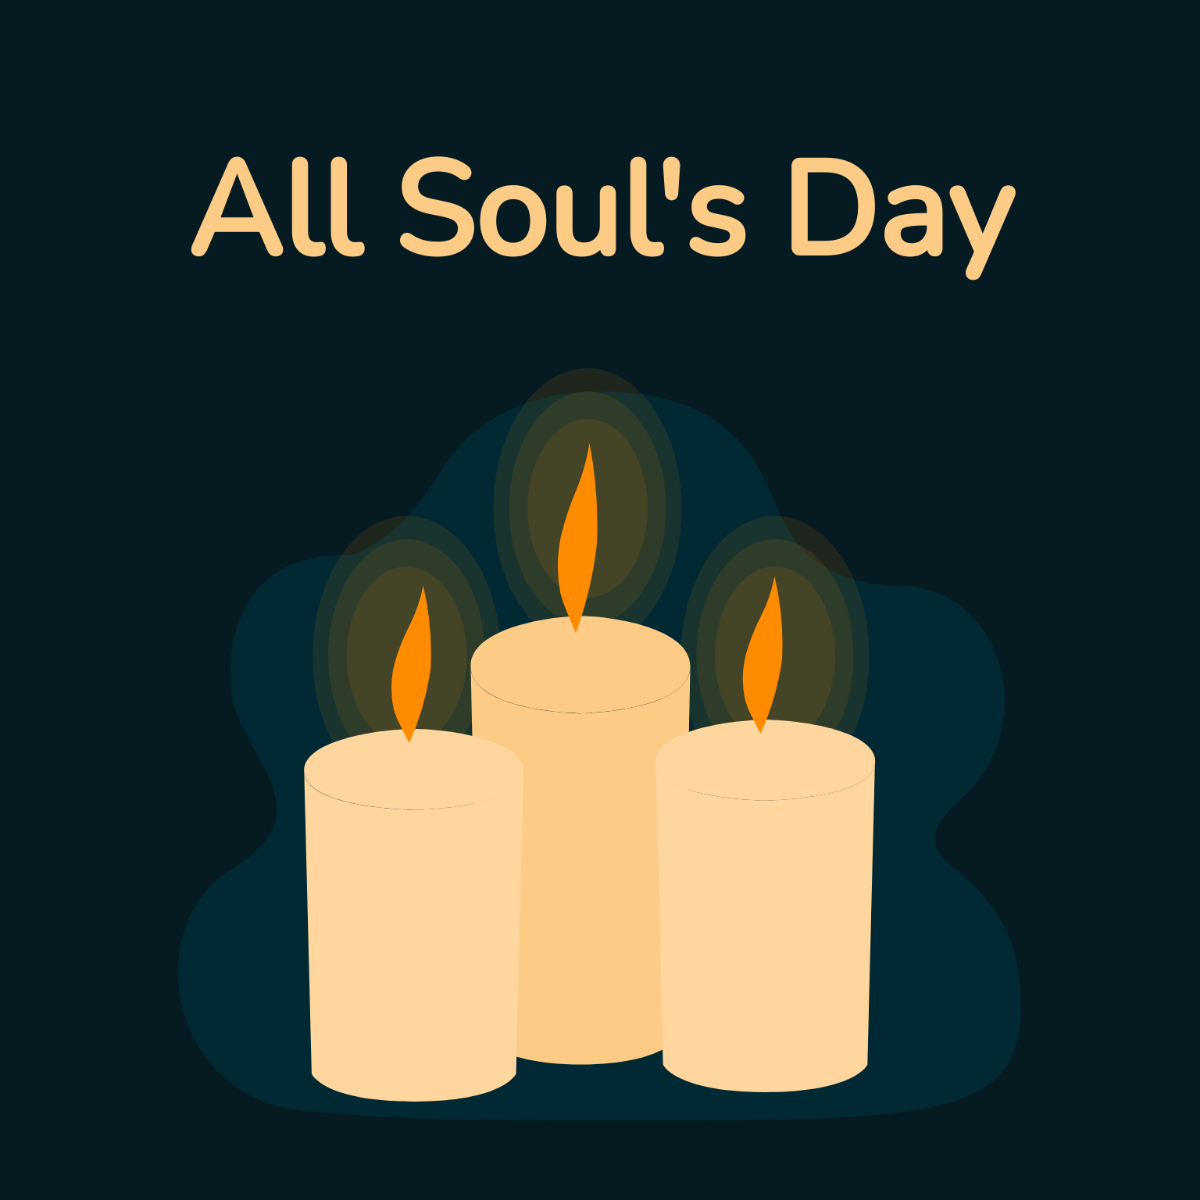 Free All Souls' Day Clipart Vector Template